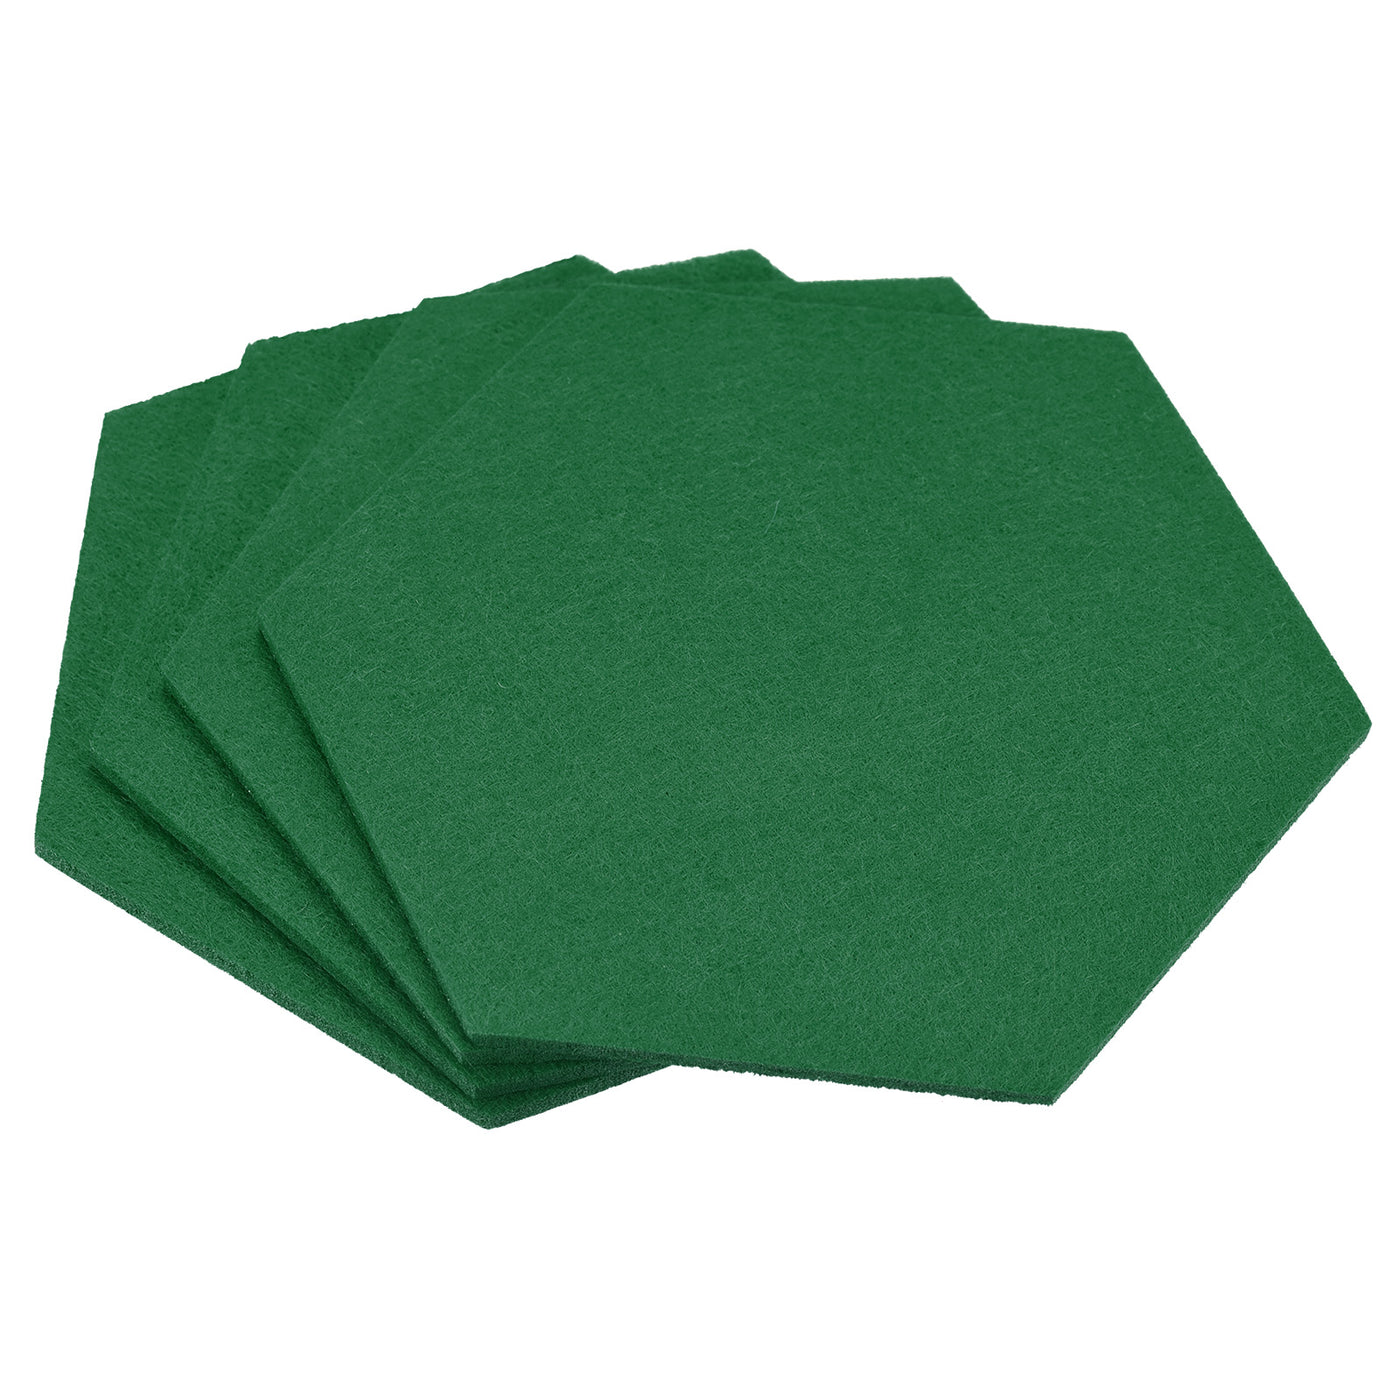 uxcell Uxcell Felt Coasters 4pcs Absorbent Pad Coaster for Drink Cup Pot Bowl Vase Green